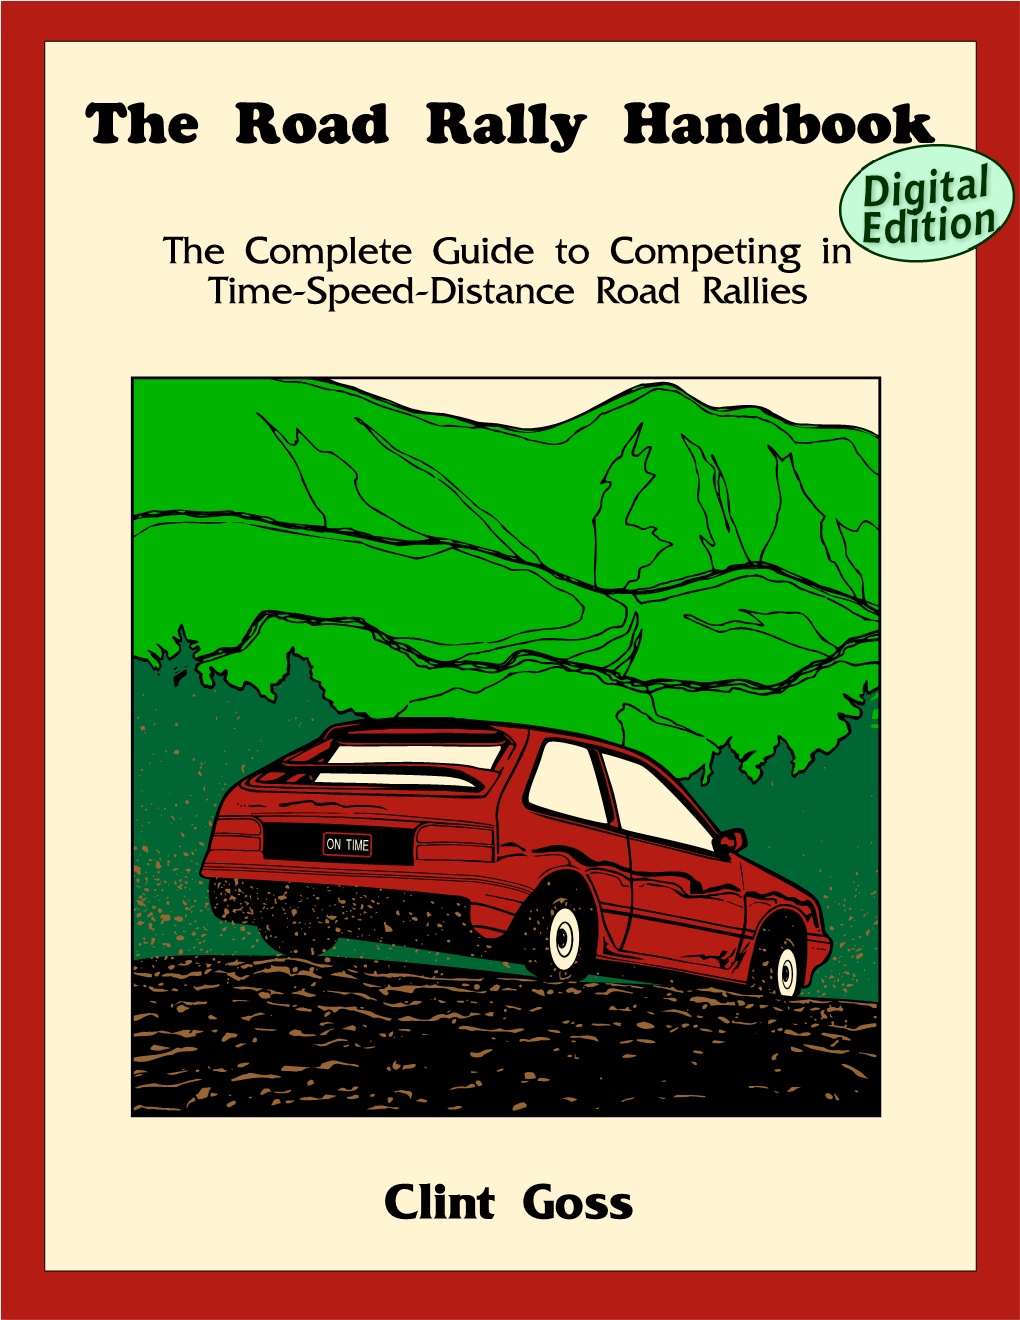 The Road Rally Handbook Is Now Available As a Free PDF Download